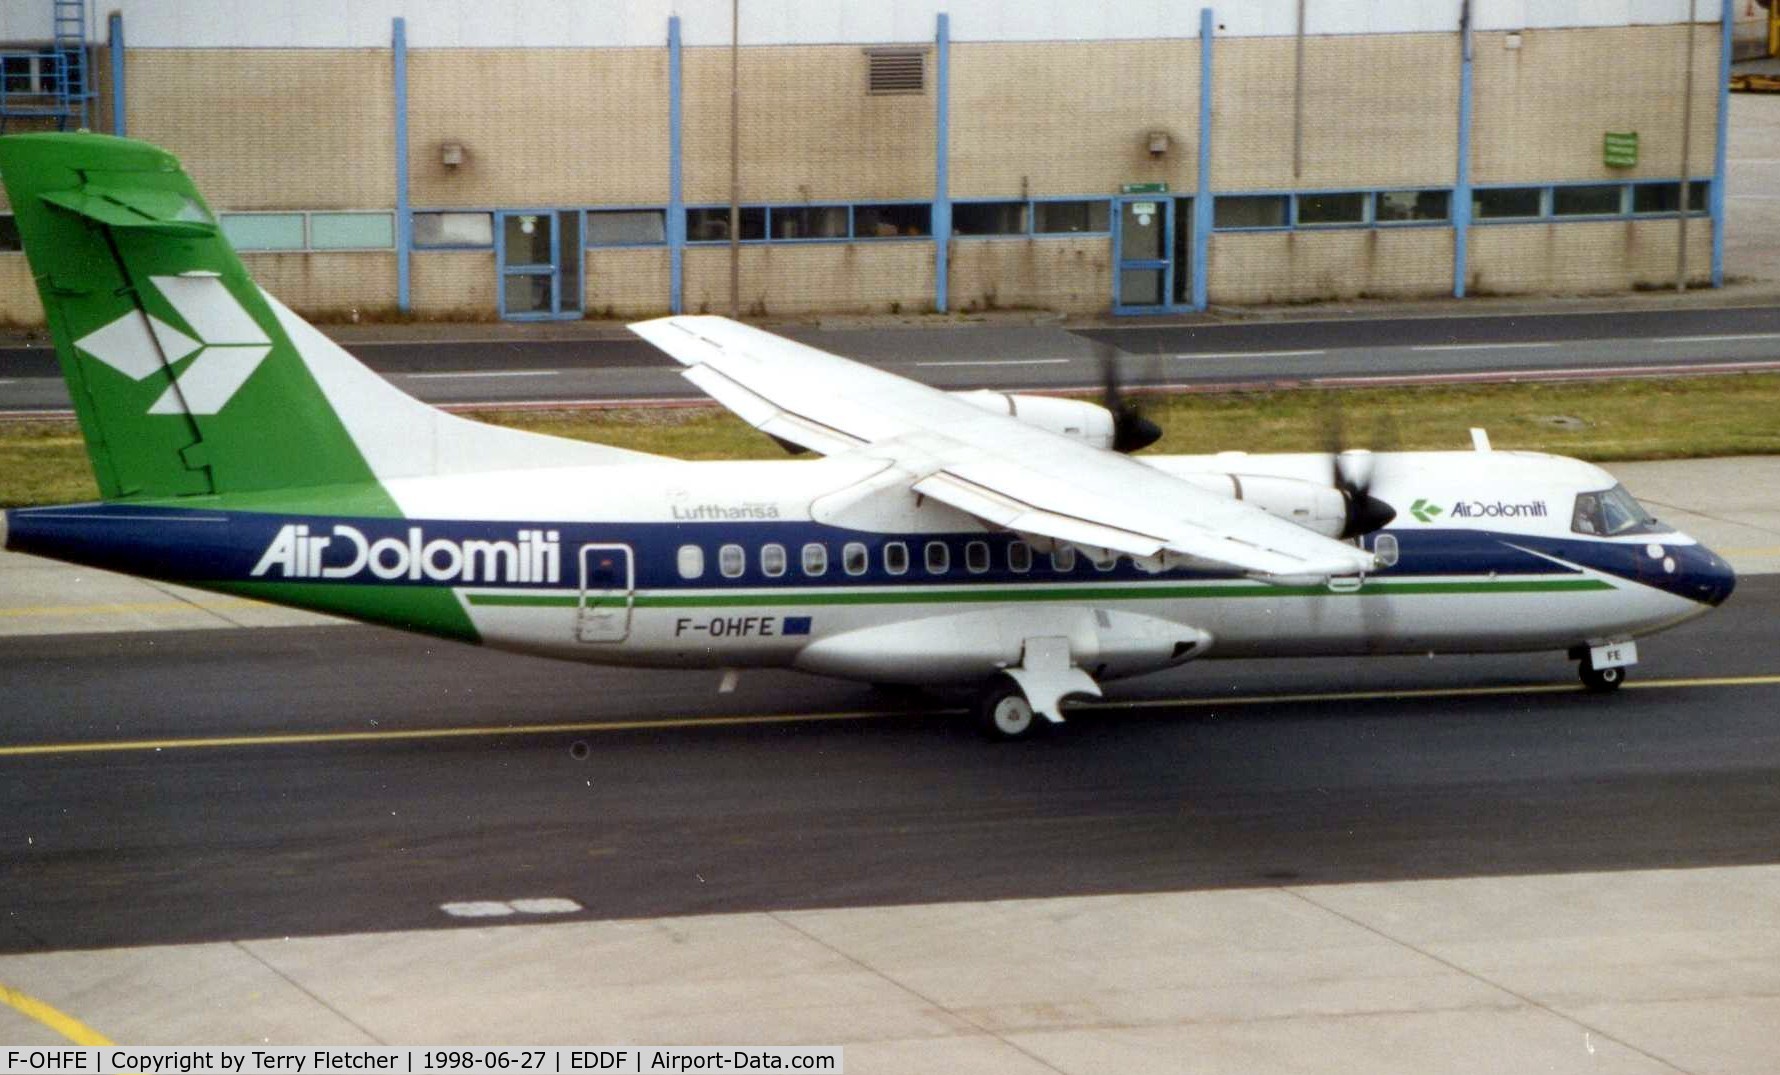 F-OHFE, 1994 ATR 42-320 C/N 378, Air Dolomiti ATR42 operated for Lufthansa in 1998 - seen here at Frankfurt (Germany) - this aircraft was subsequently registered as PH-XLM and then PJ-XLM